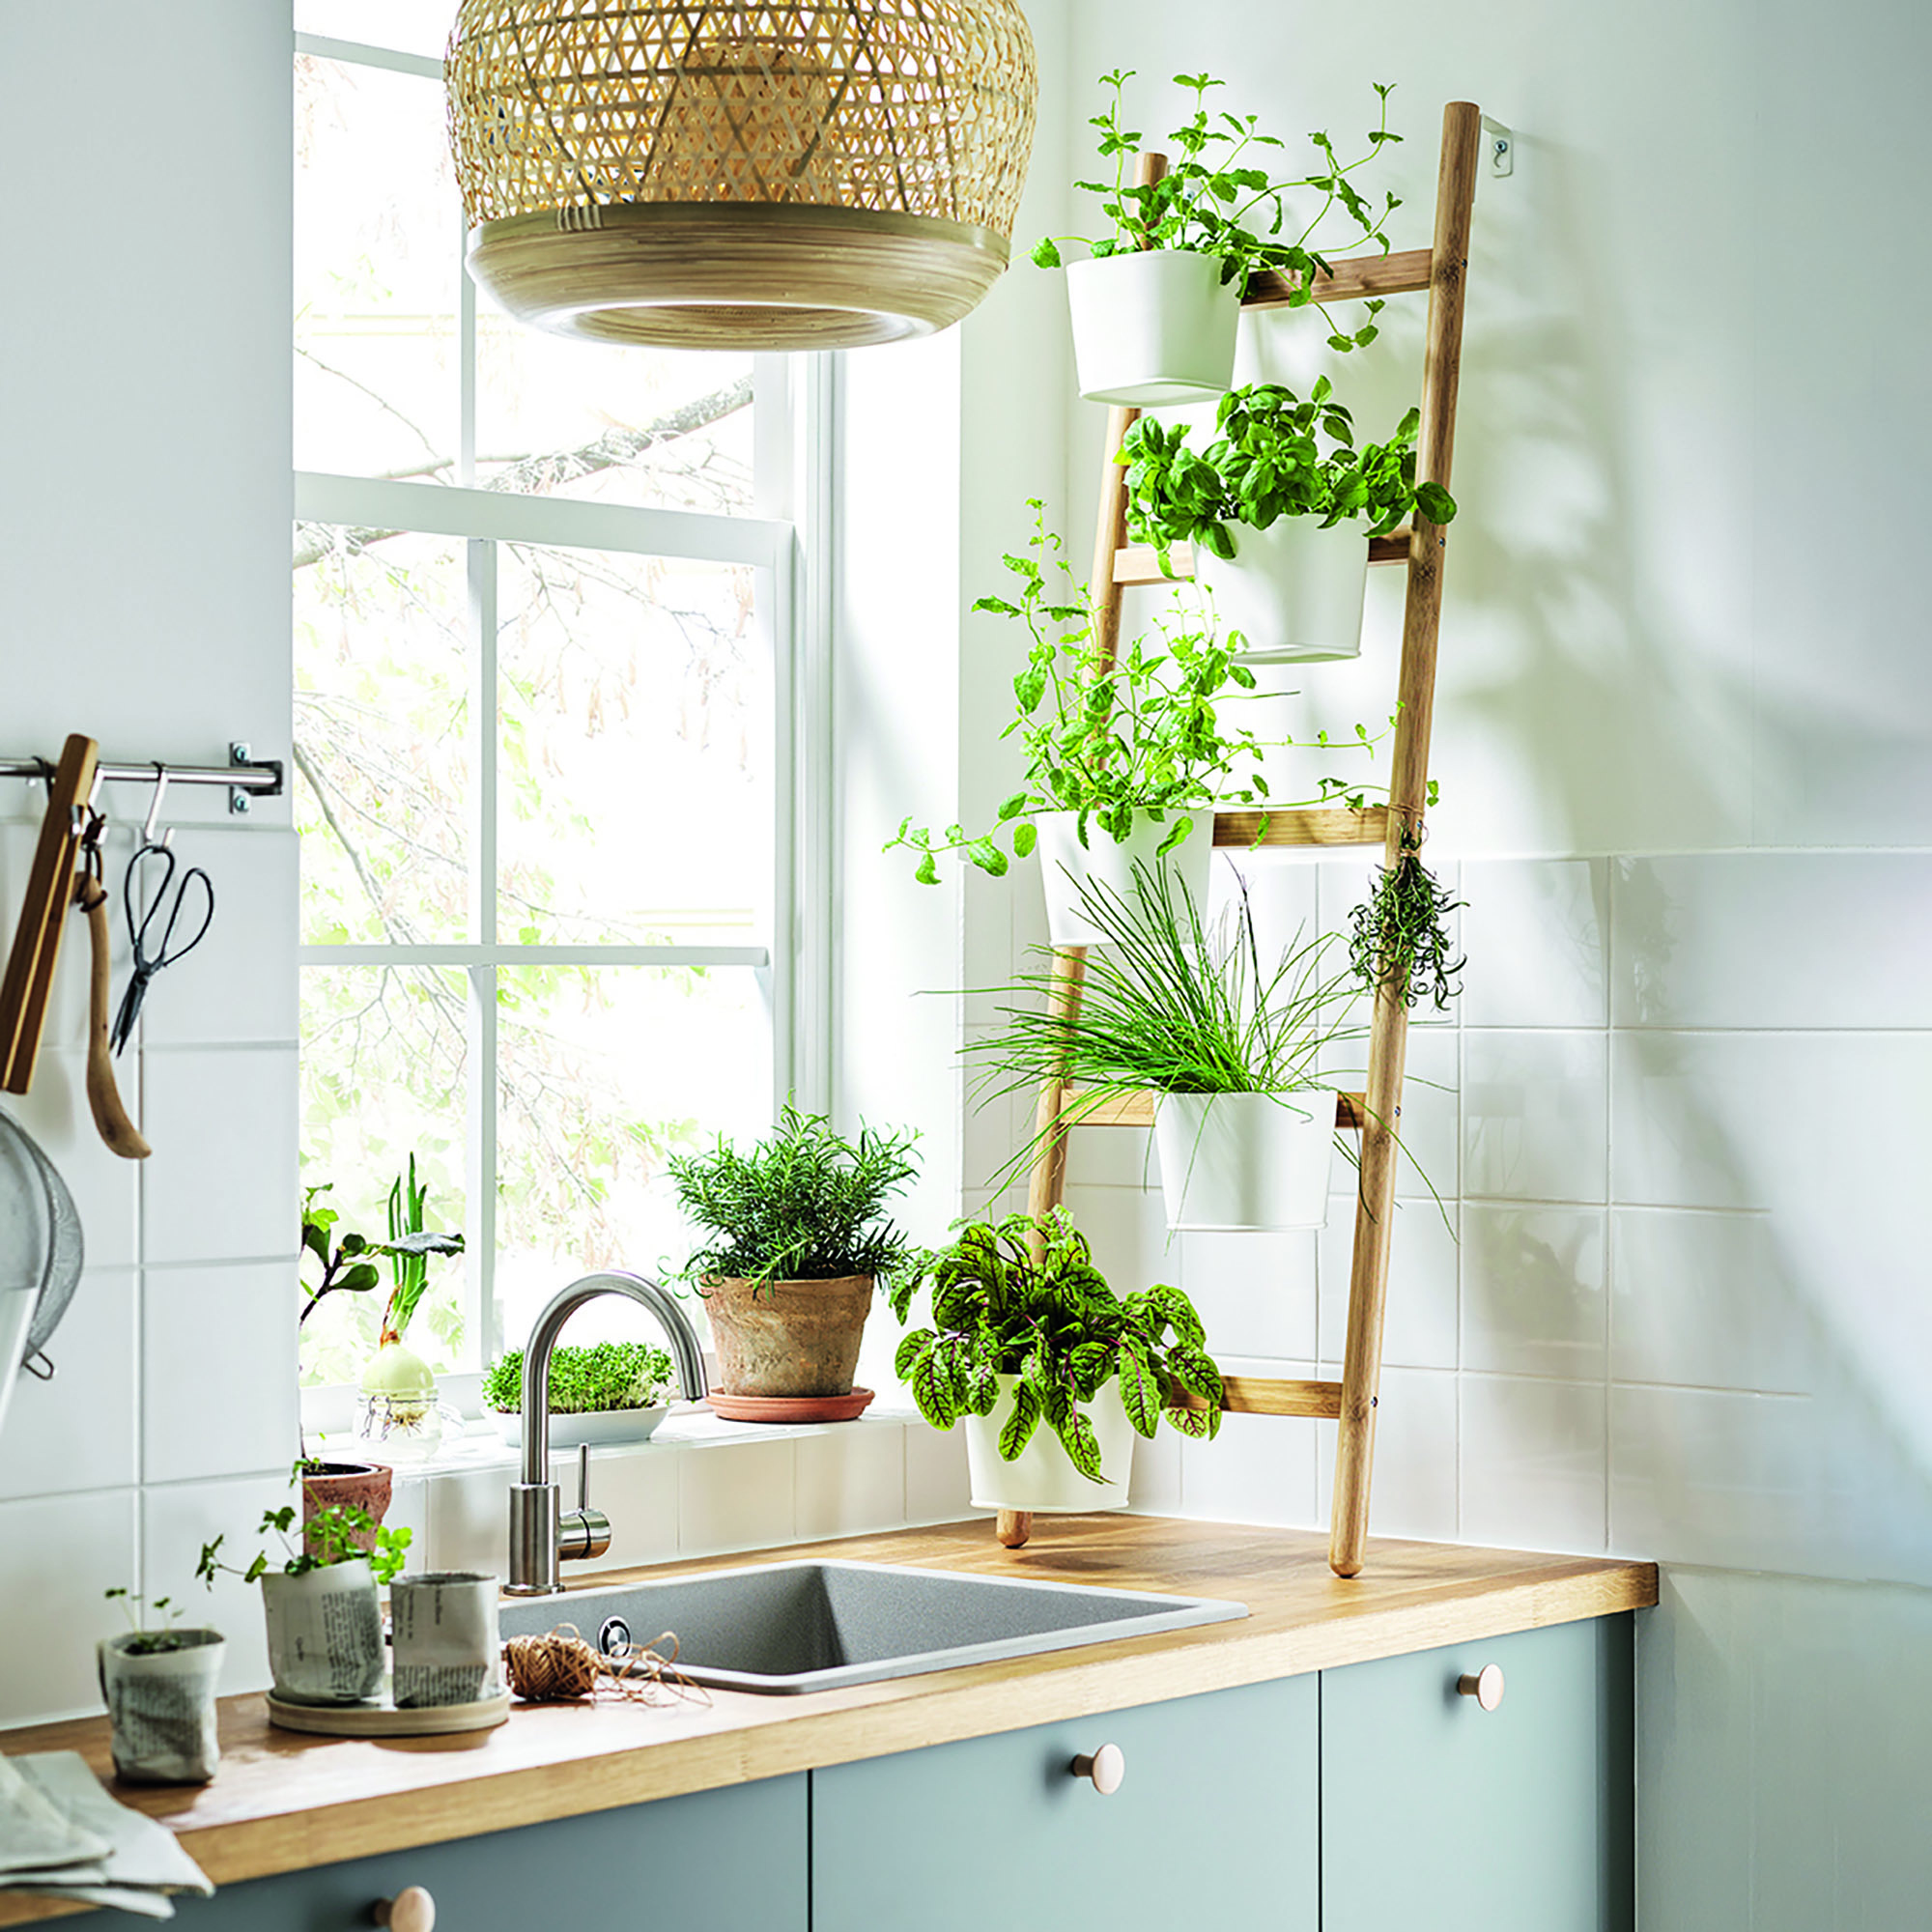 50 small kitchen ideas for even the tiniest of spaces